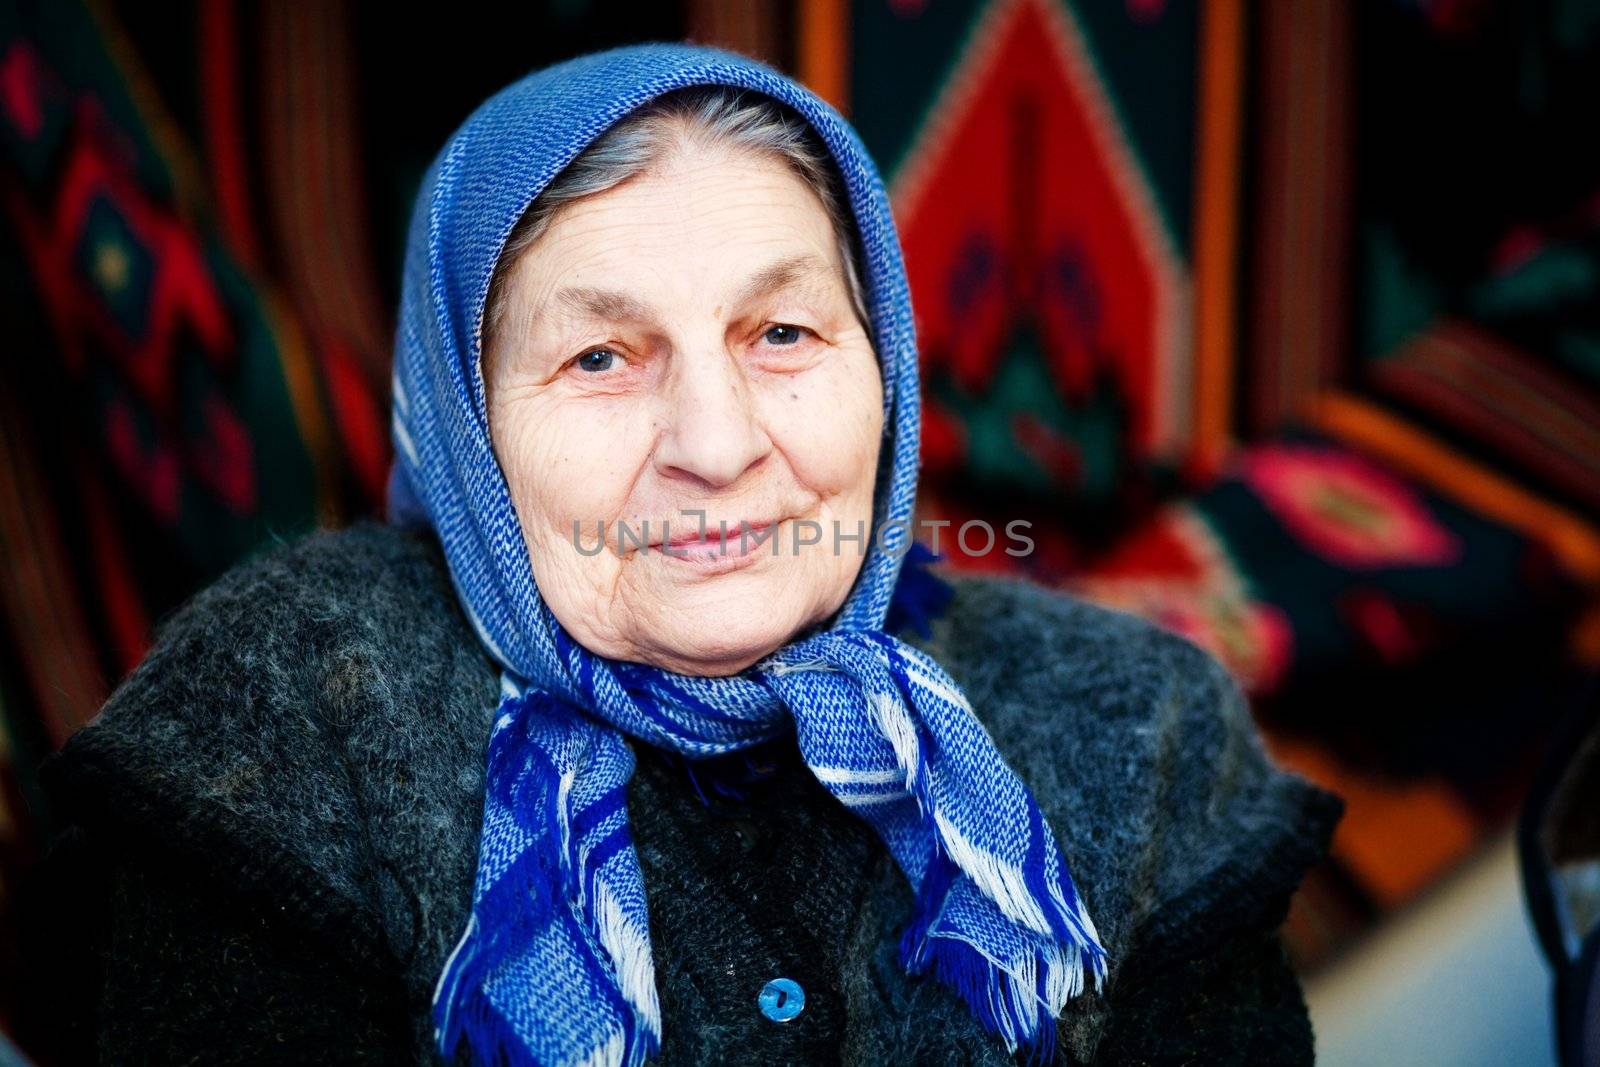 An image of a portrait of a grandmother